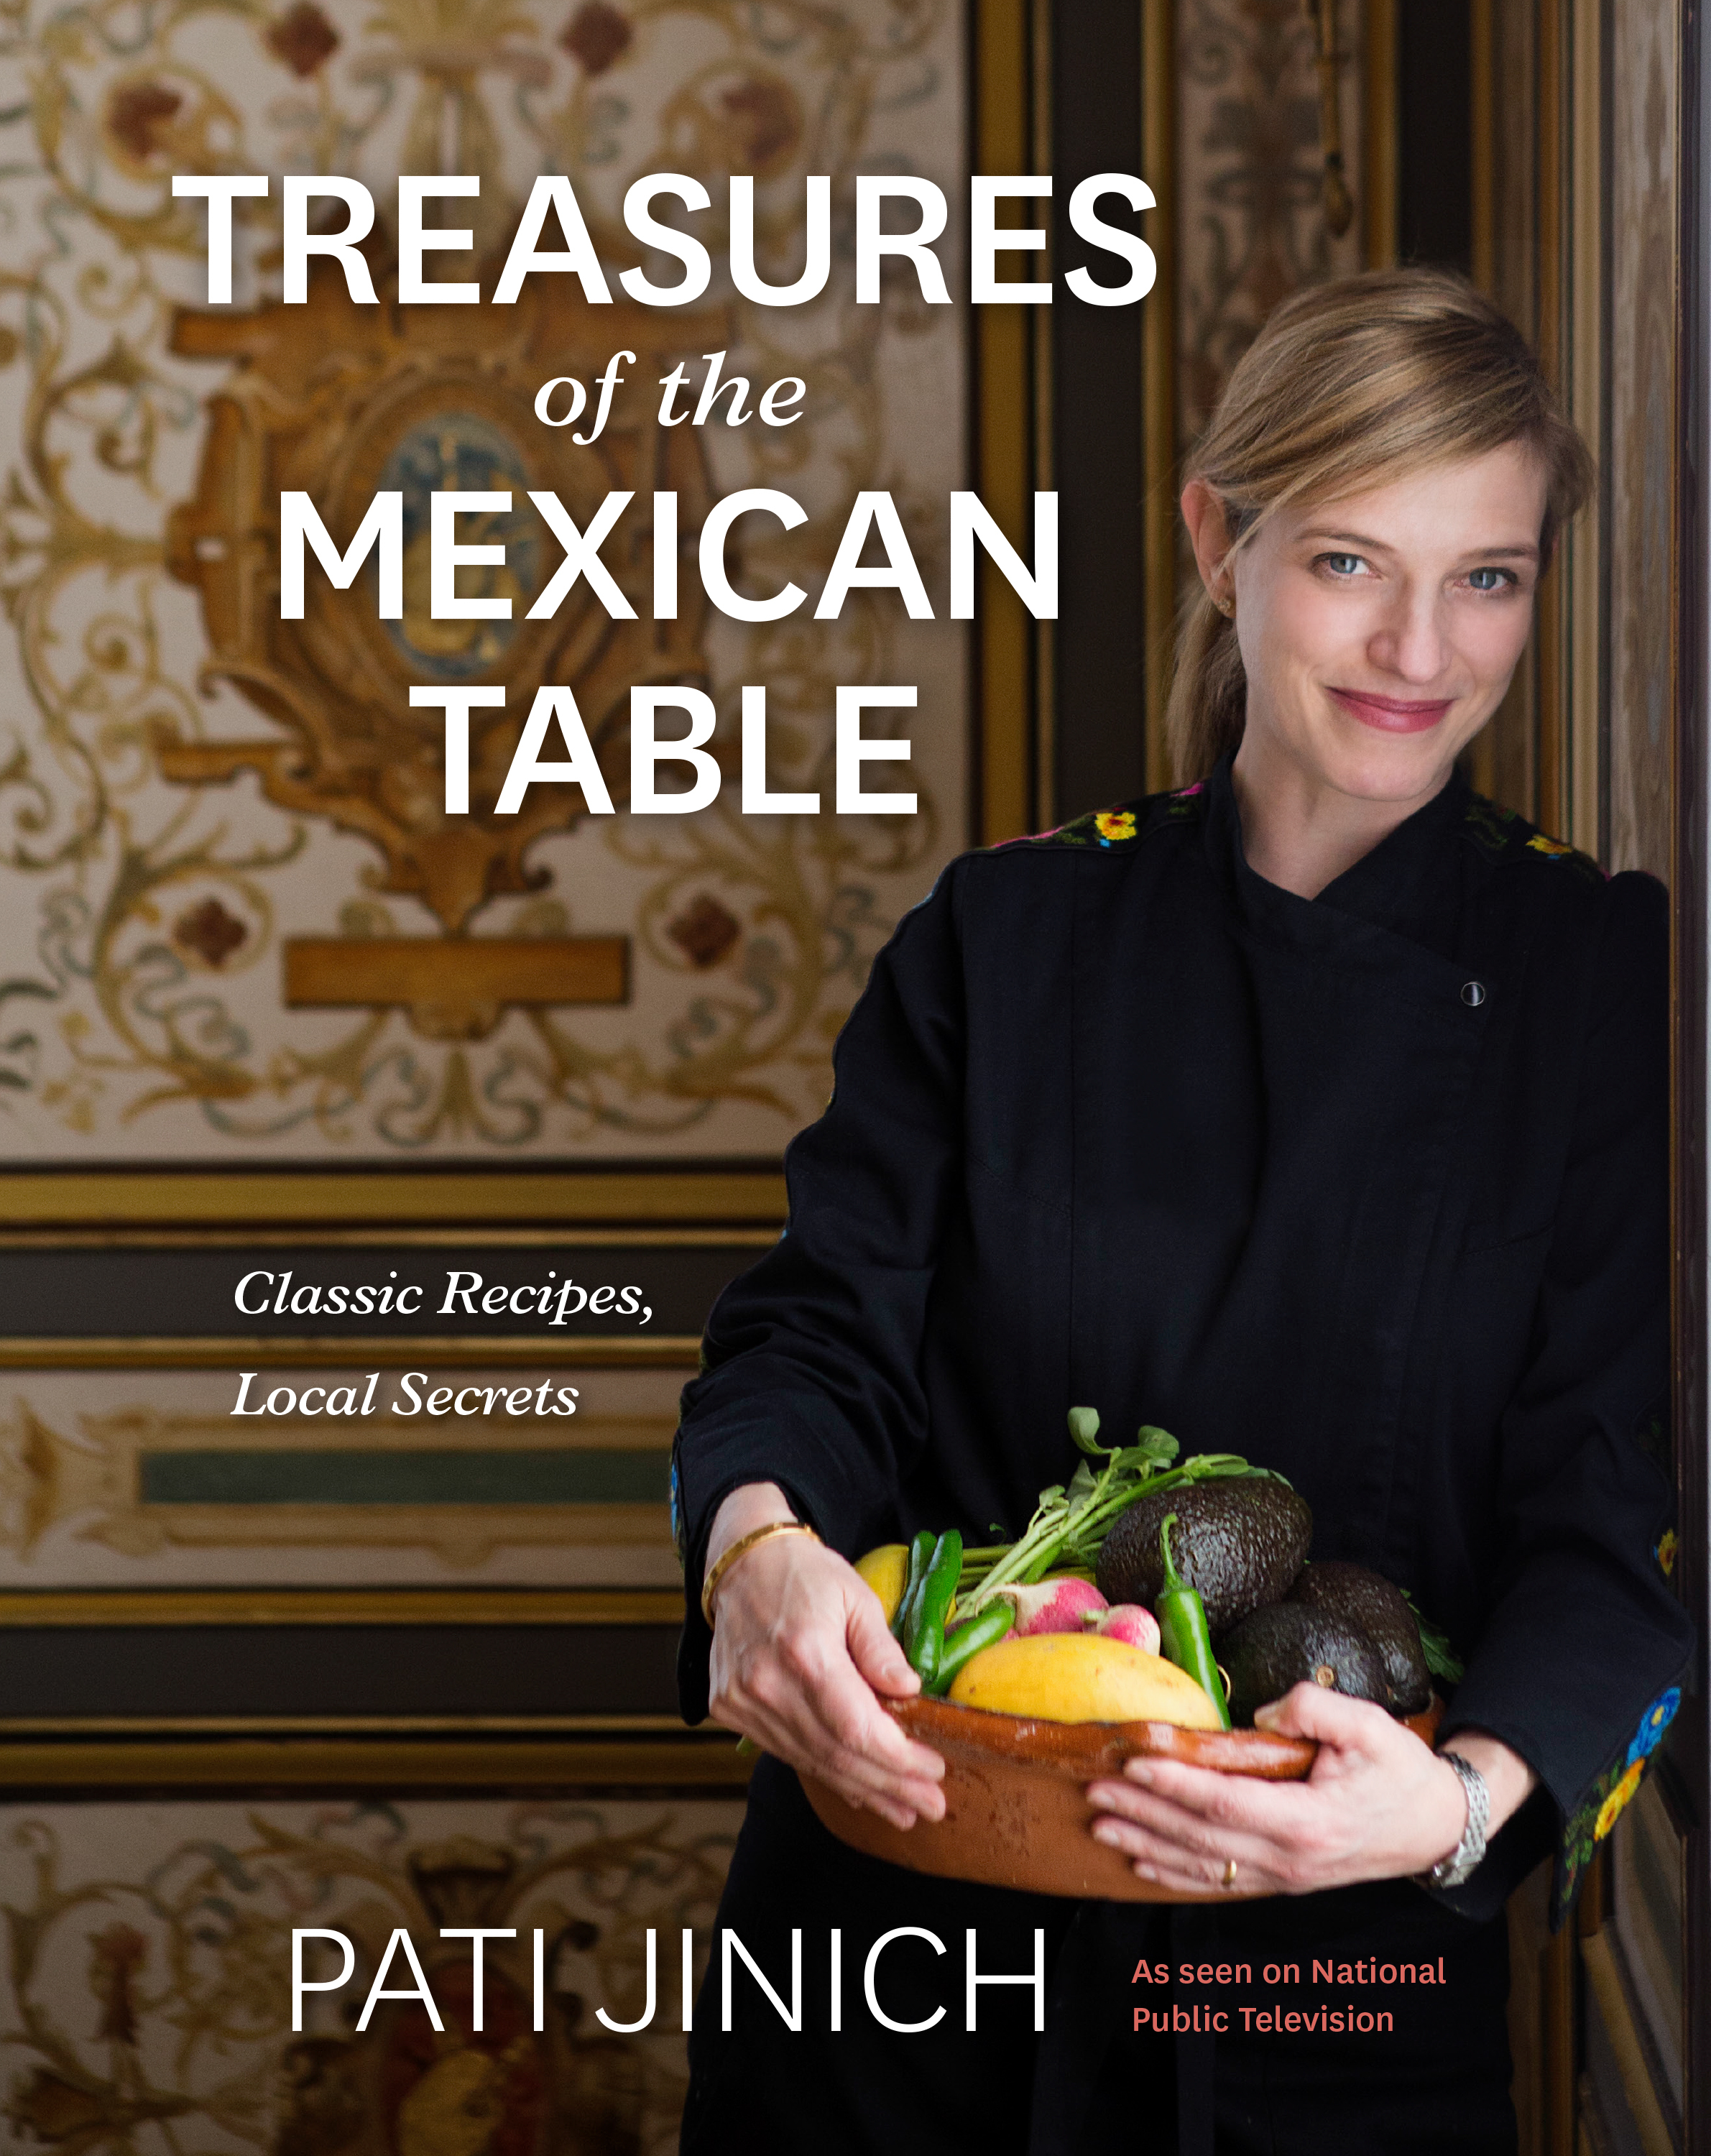 “Treasures of the Mexican Table: Classic Recipes, Local Secrets,” by Pati Jinich.